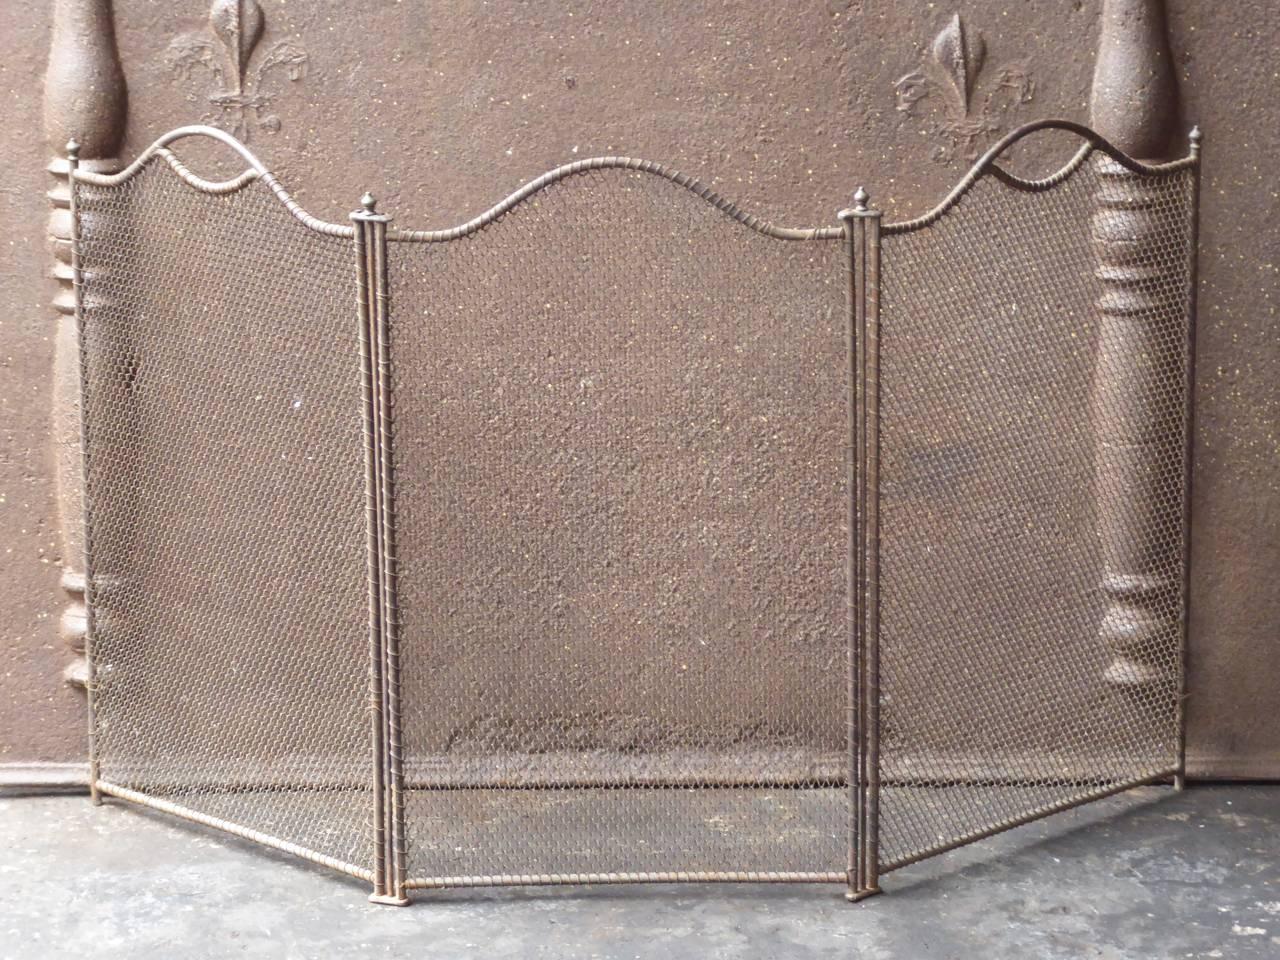 19th century French fireplace screen made of iron and iron mesh.

We have a unique and specialized collection of antique and used fireplace accessories consisting of more than 1000 listings at 1stdibs. Amongst others, we always have 300+ firebacks,